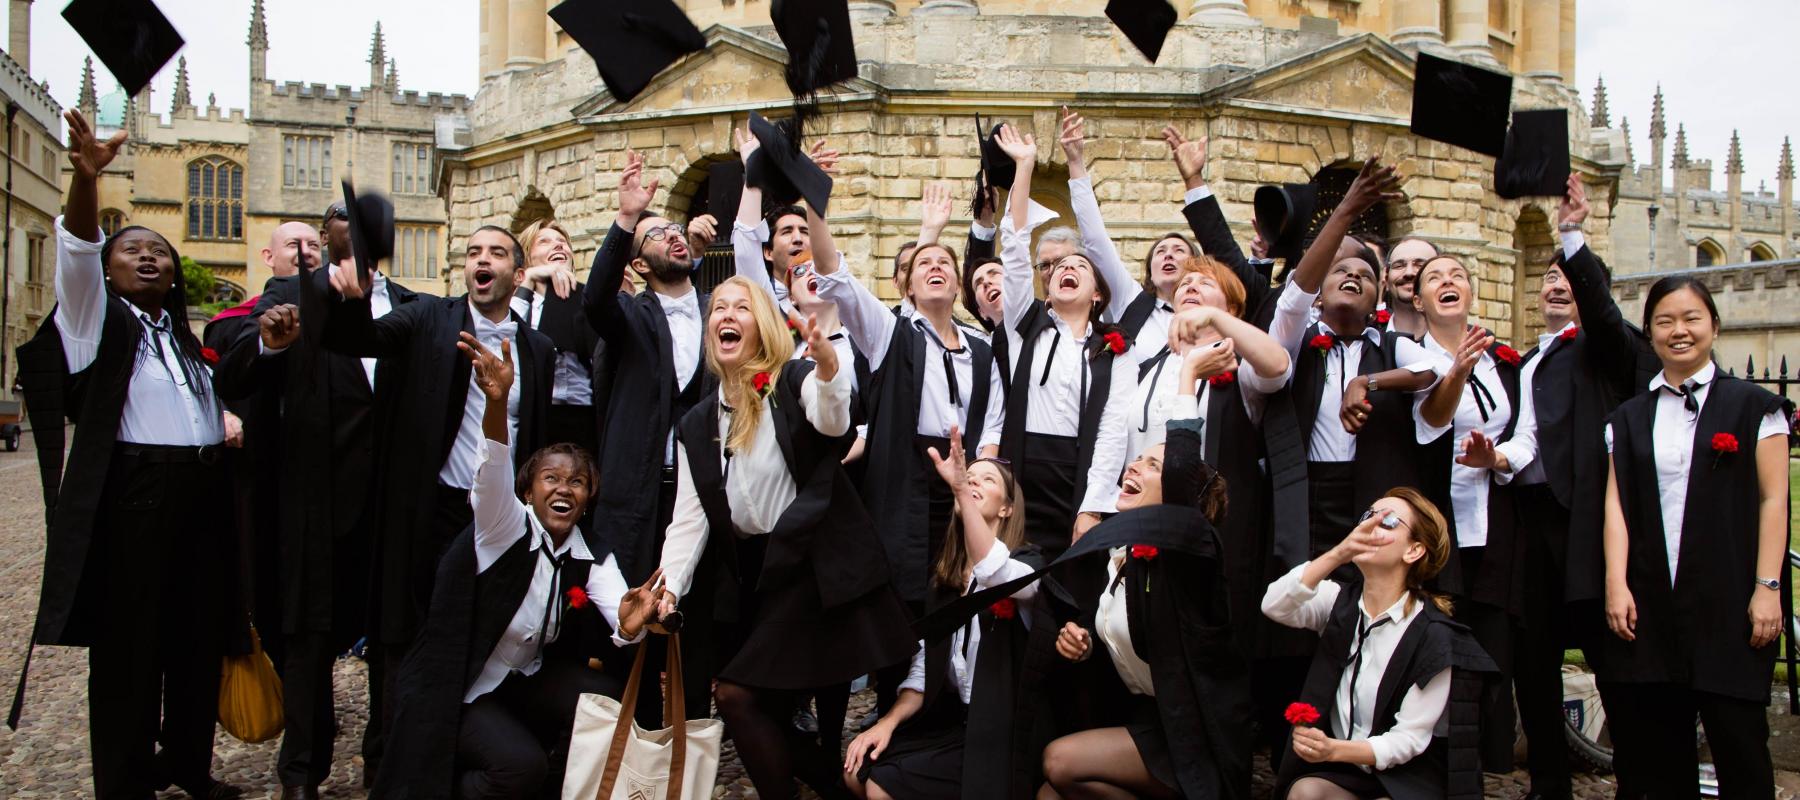 A group of students in academic dress celebrate receiving their degree